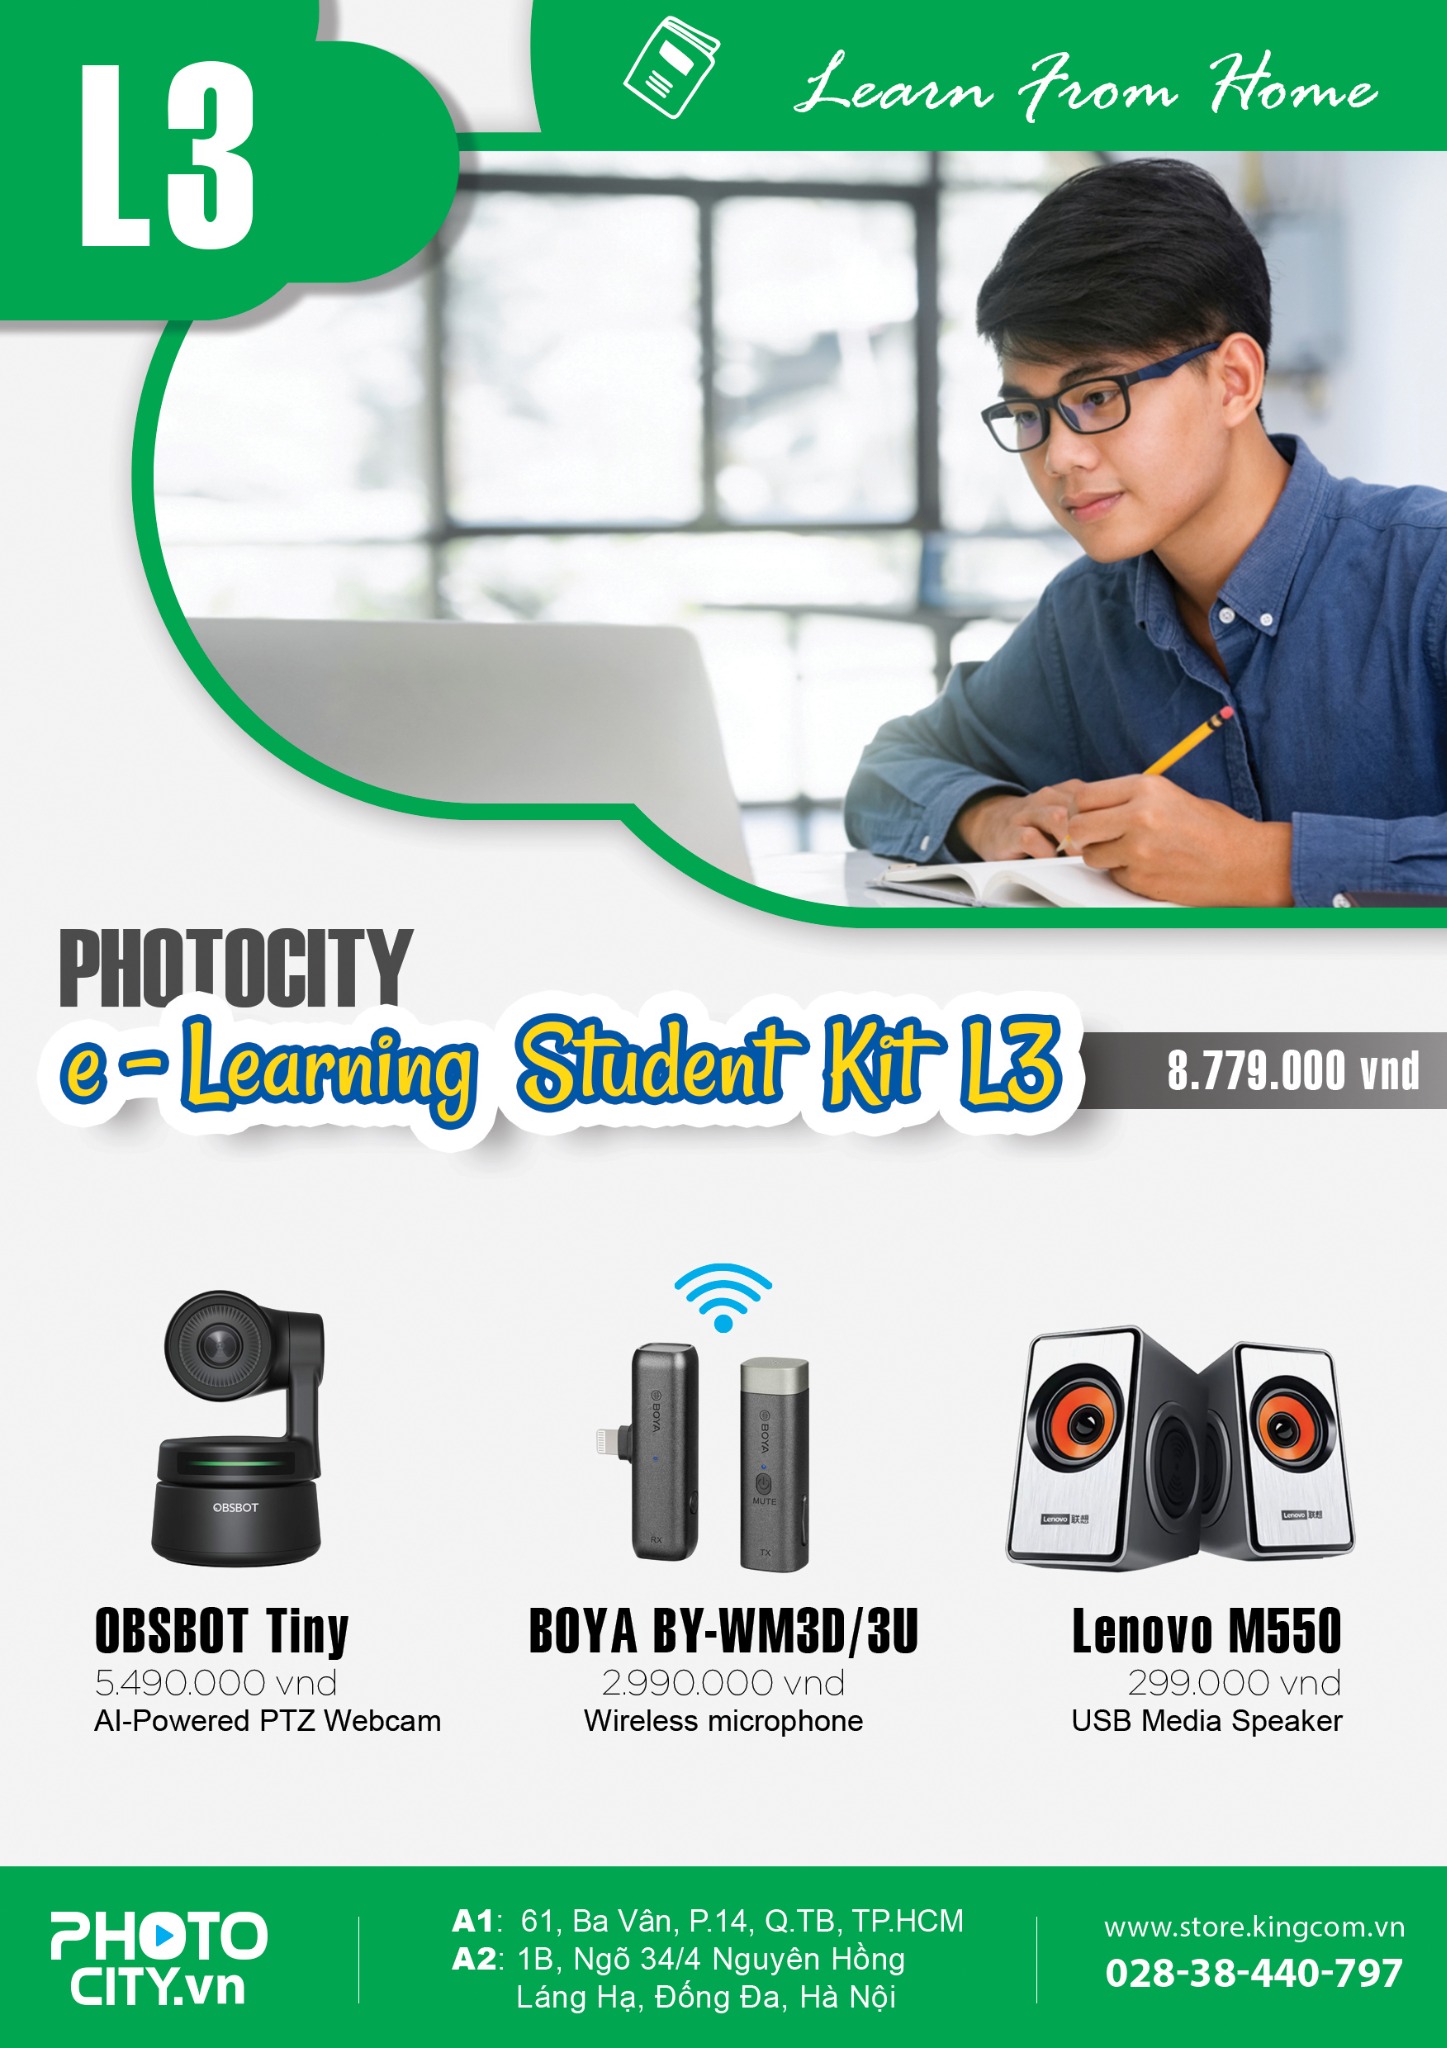 PhotoCity e -learning Student Kit L3 (Bộ dụng cụ học online)